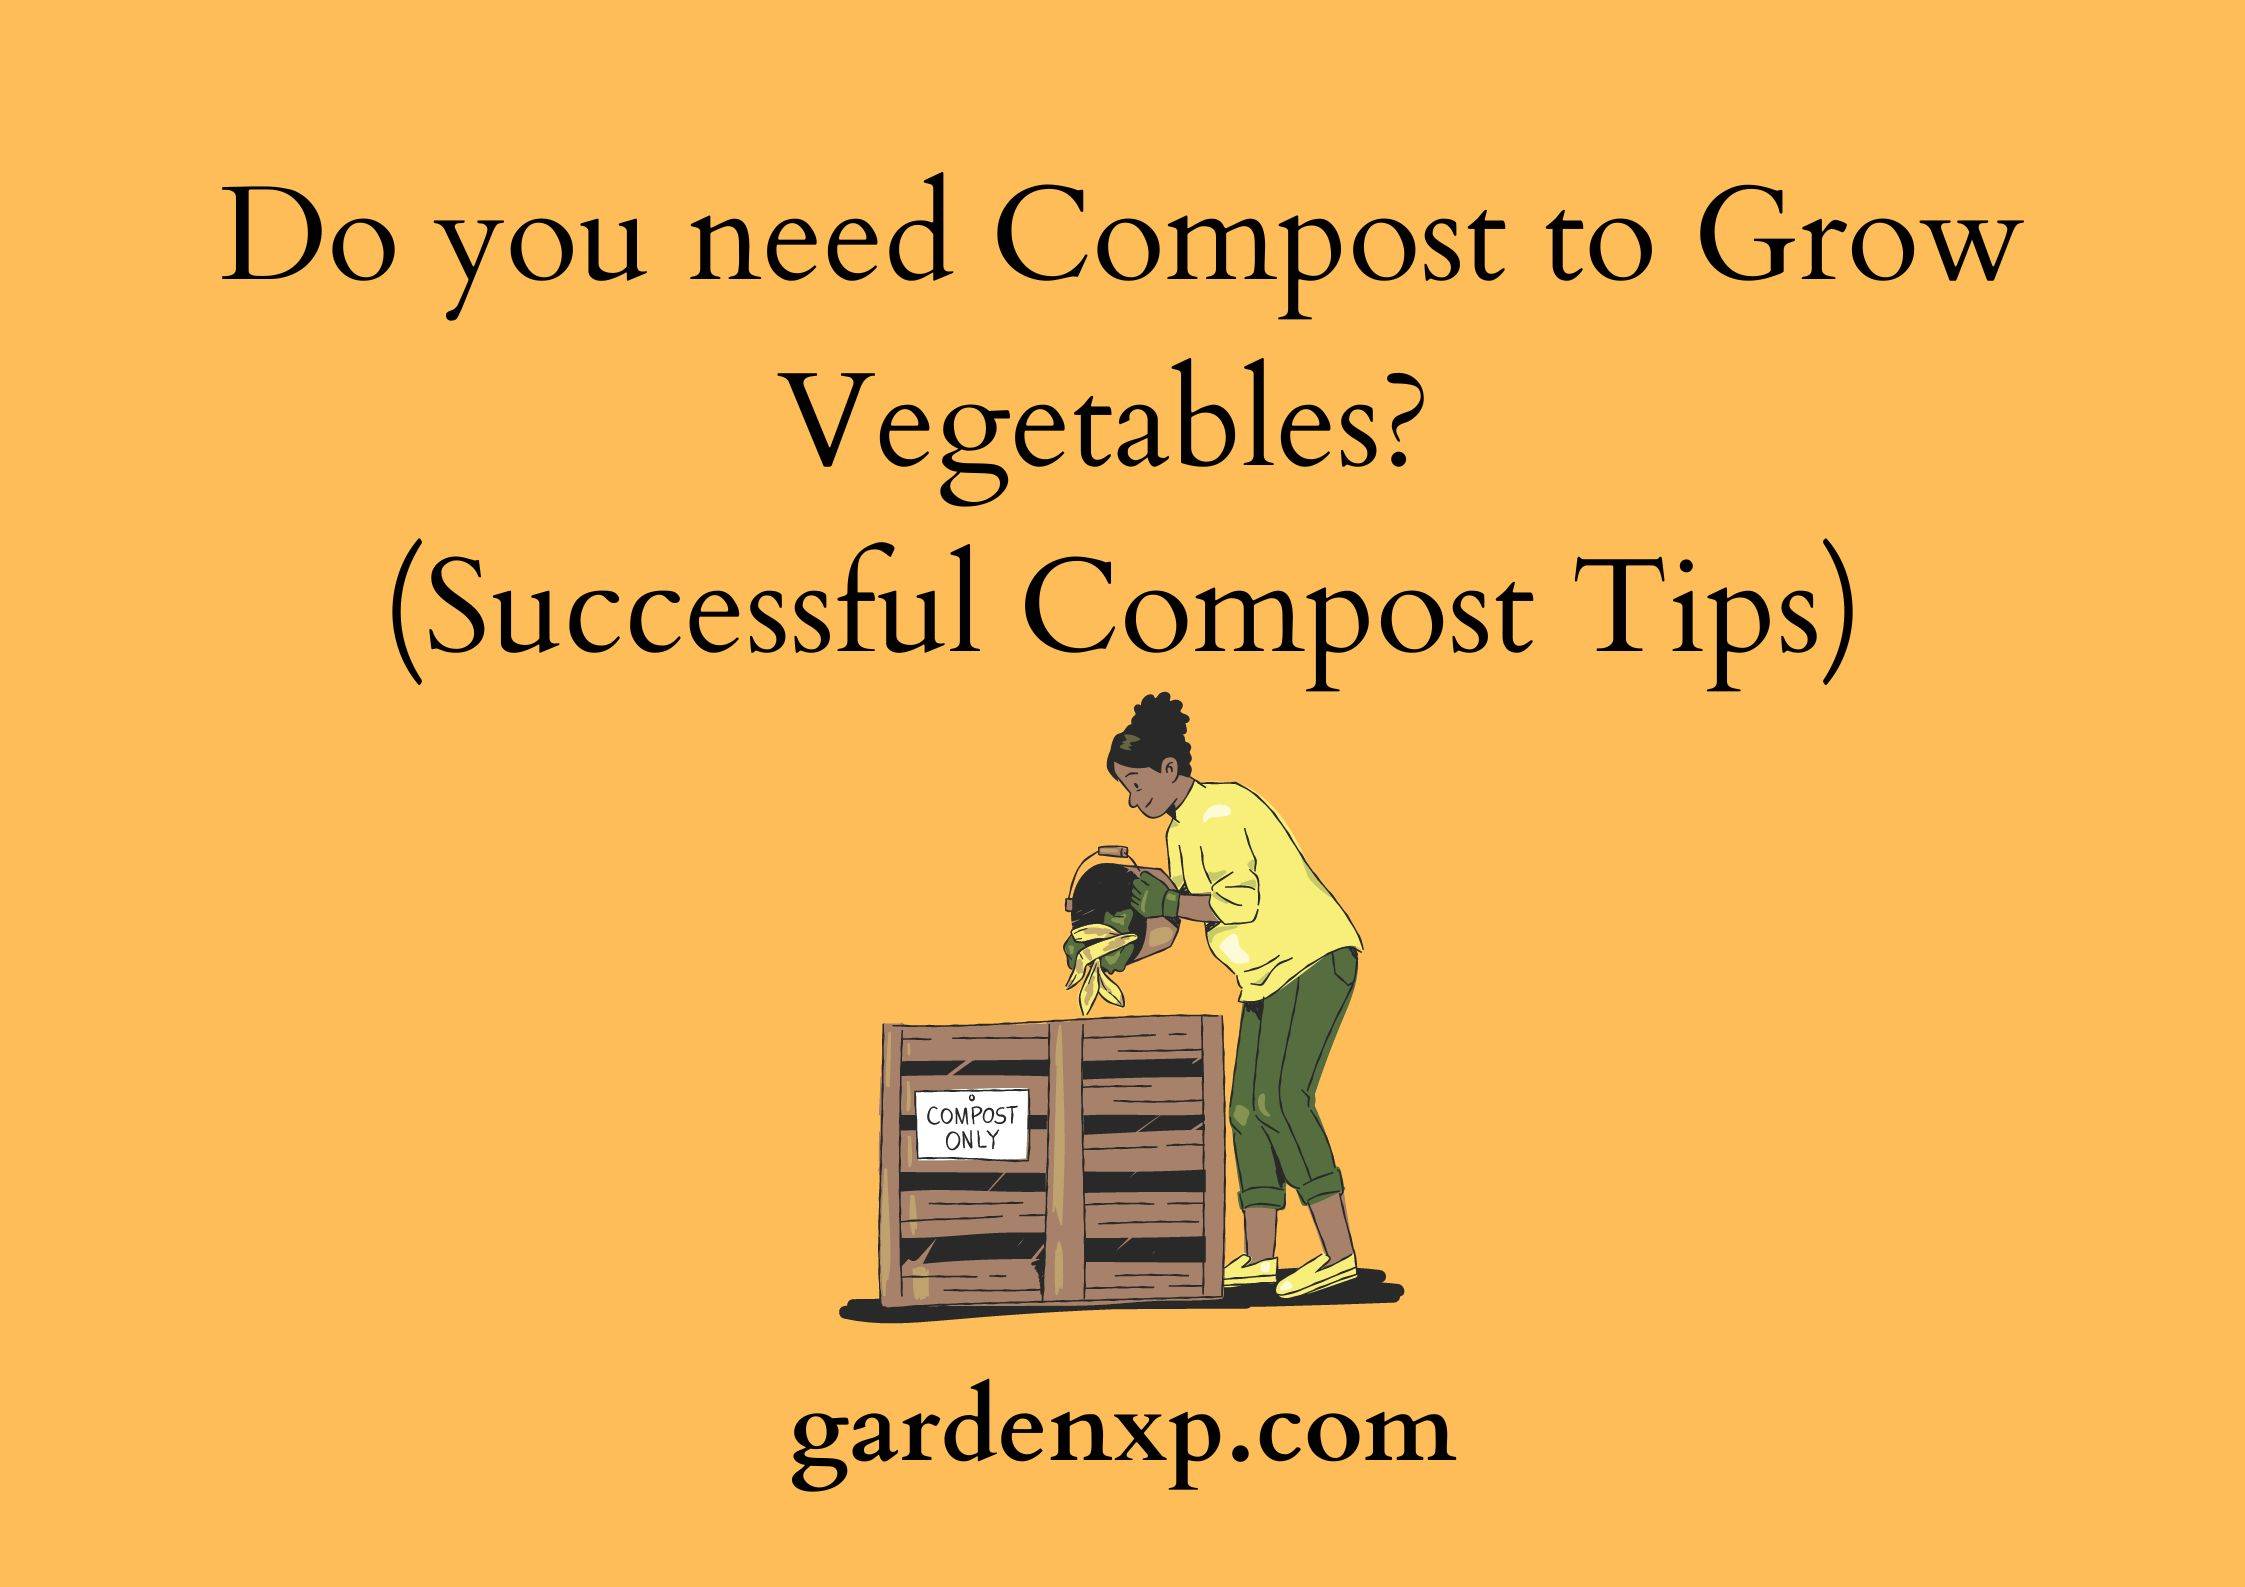 Do you need Compost to Grow Vegetables? (Successful Compost Tips)